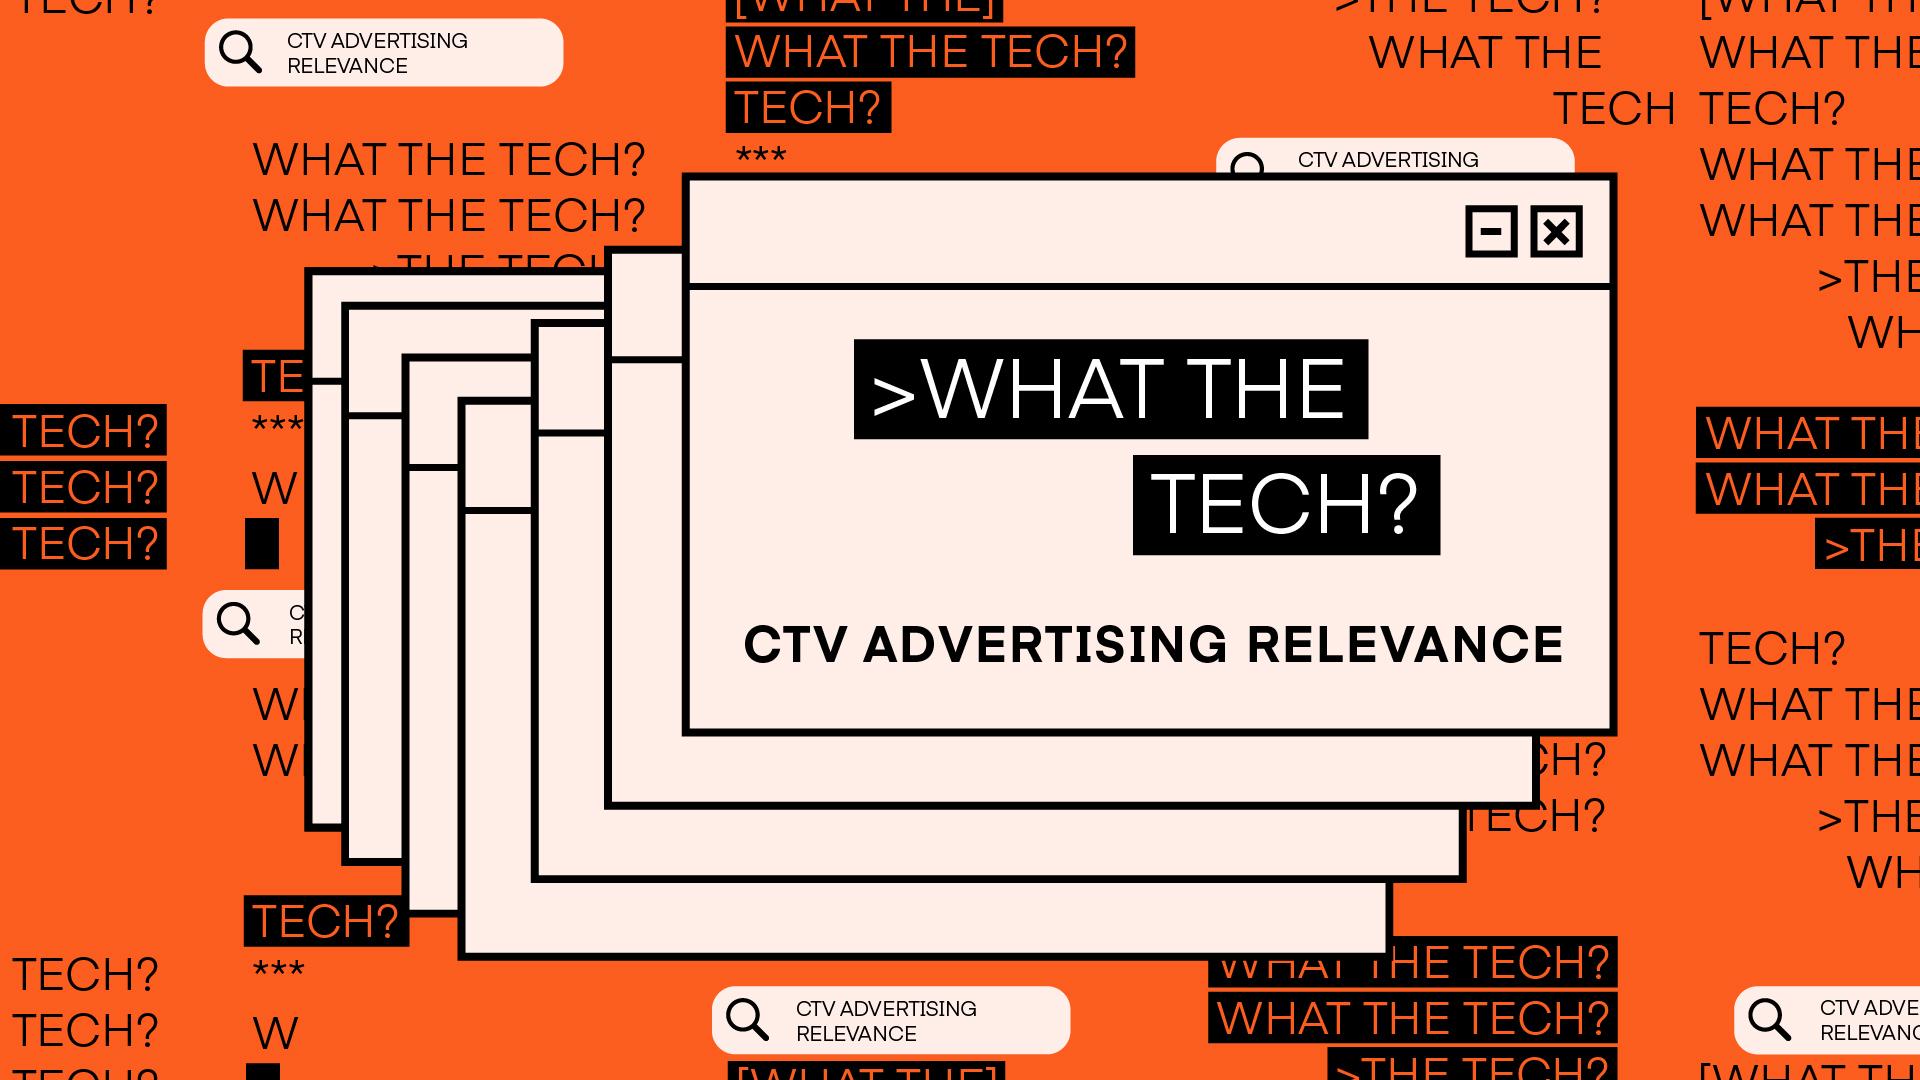 What the Tech is CTV advertising relevance?